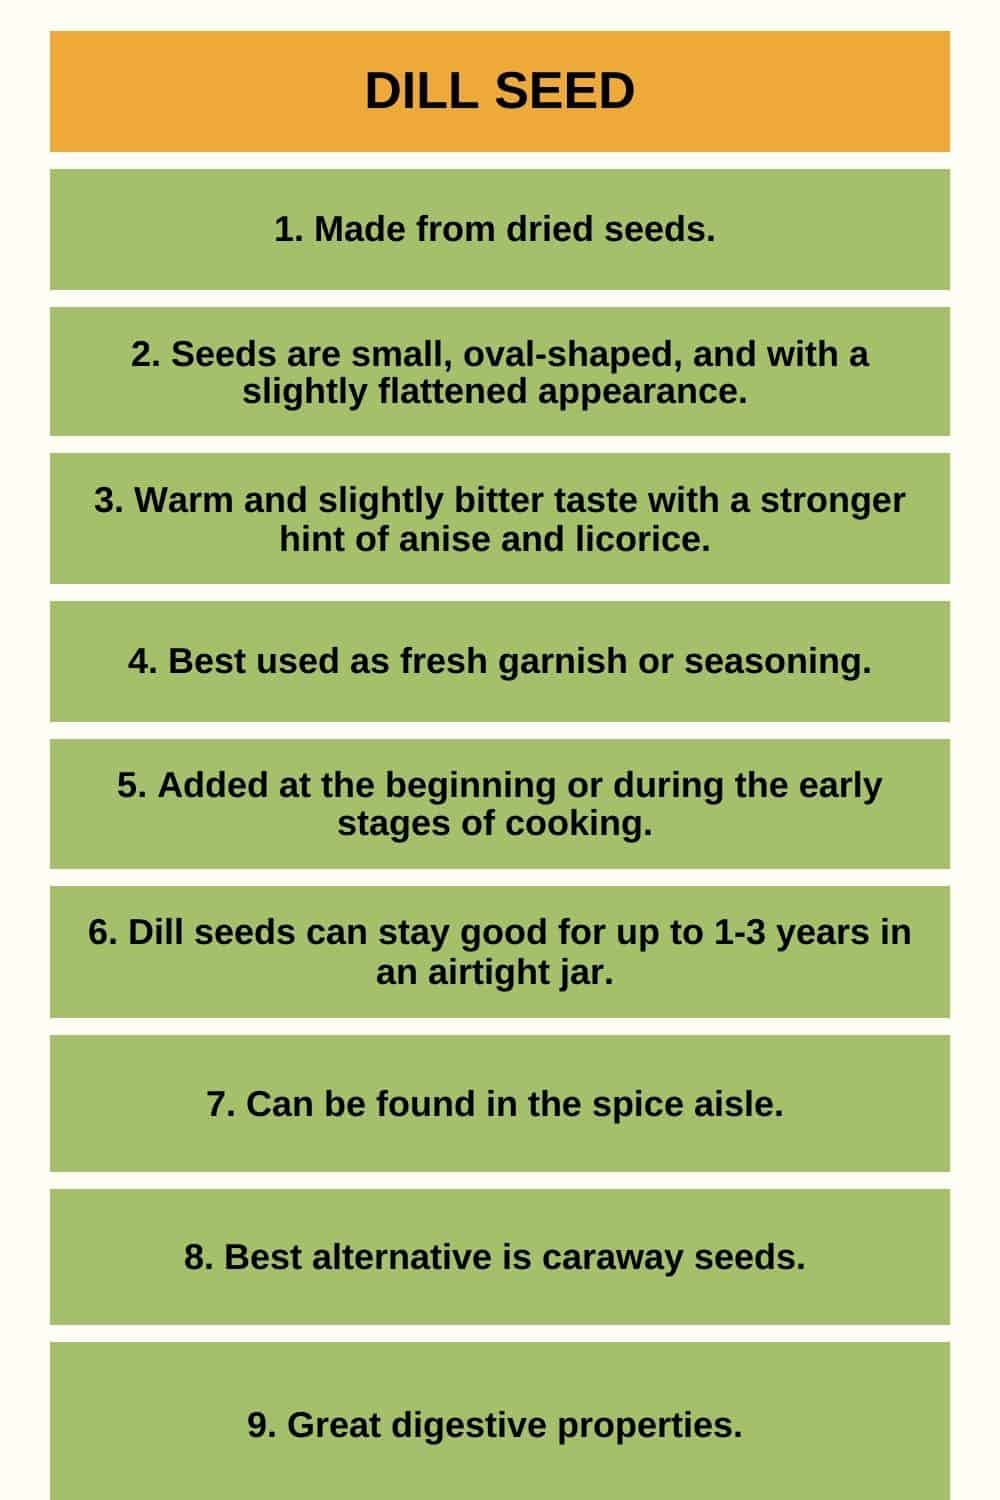 dill seed infographic